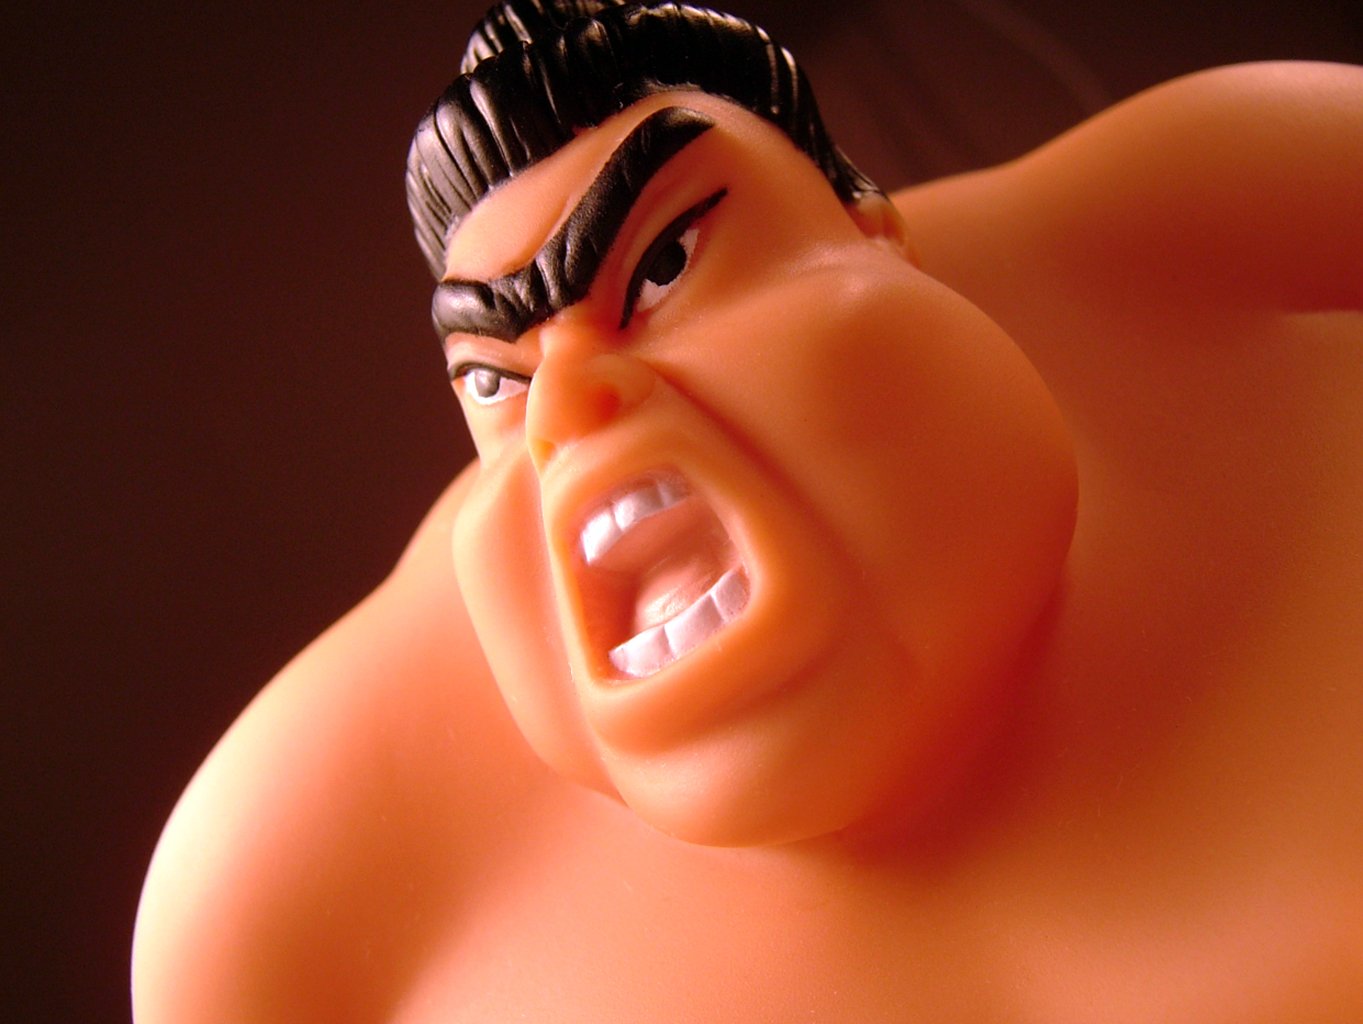 a close up of a toy of a man's face and chest